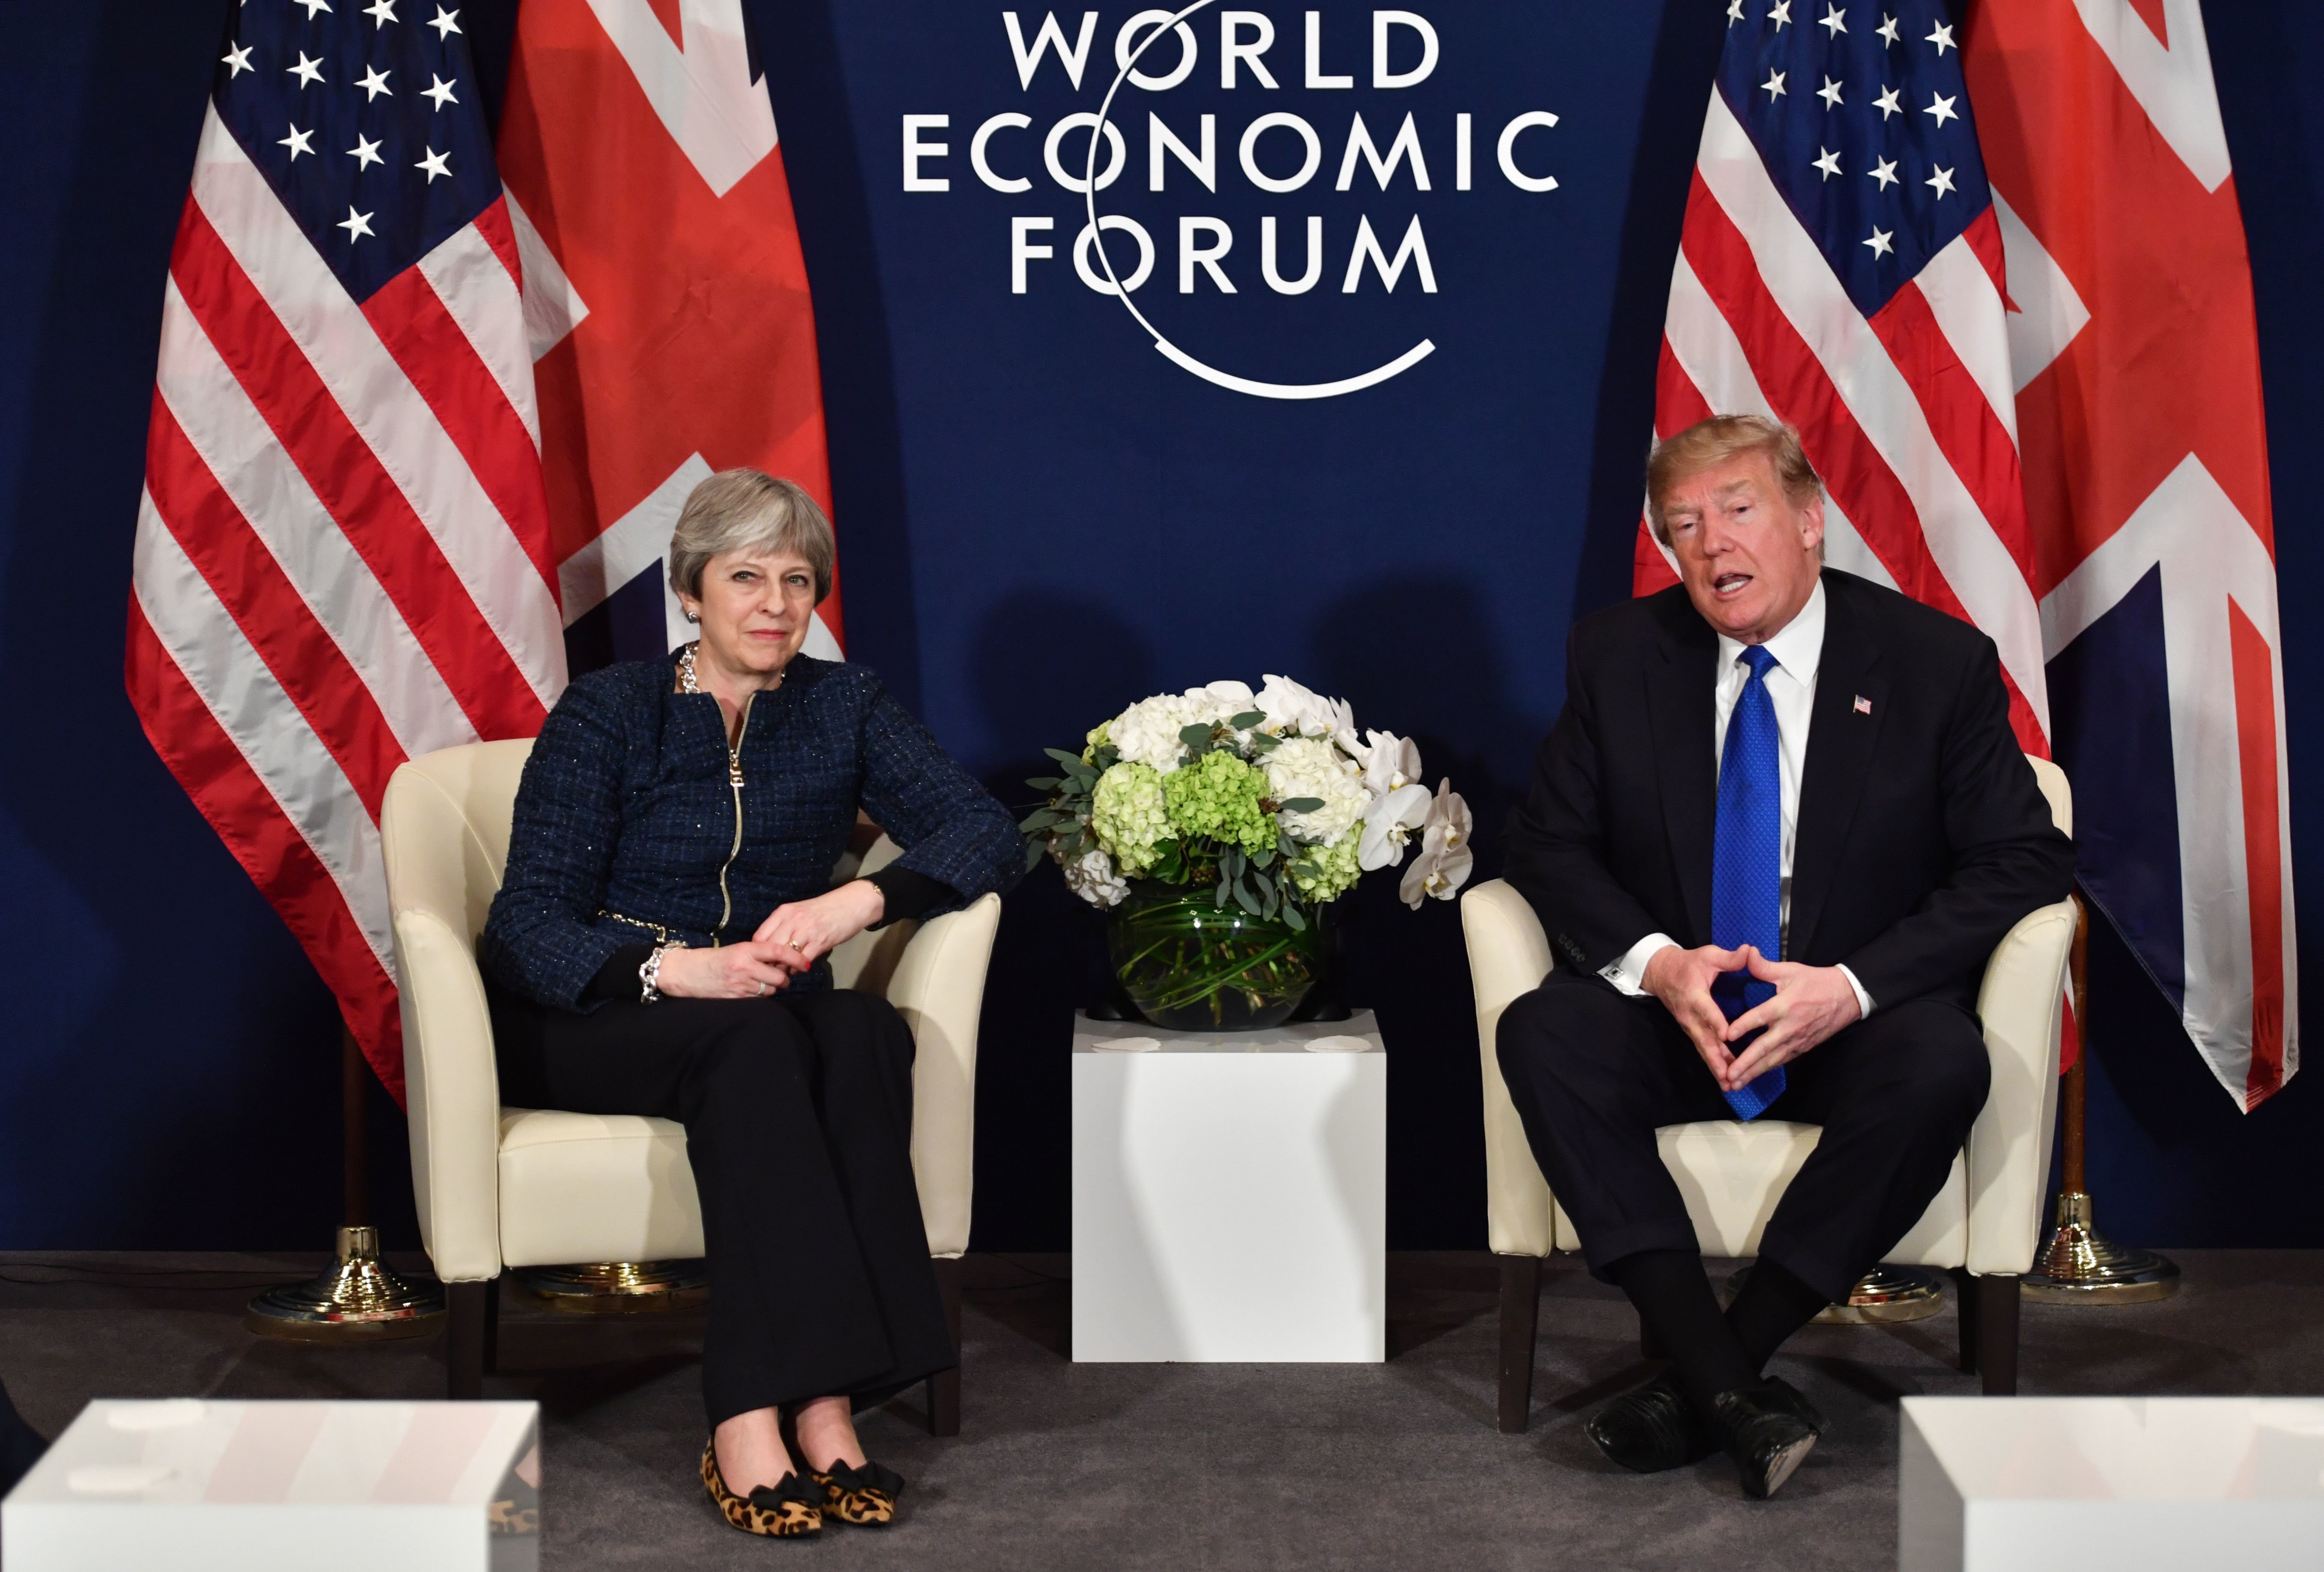 Donald Trump and Theresa May speak to reporters after a meeting in Davos.